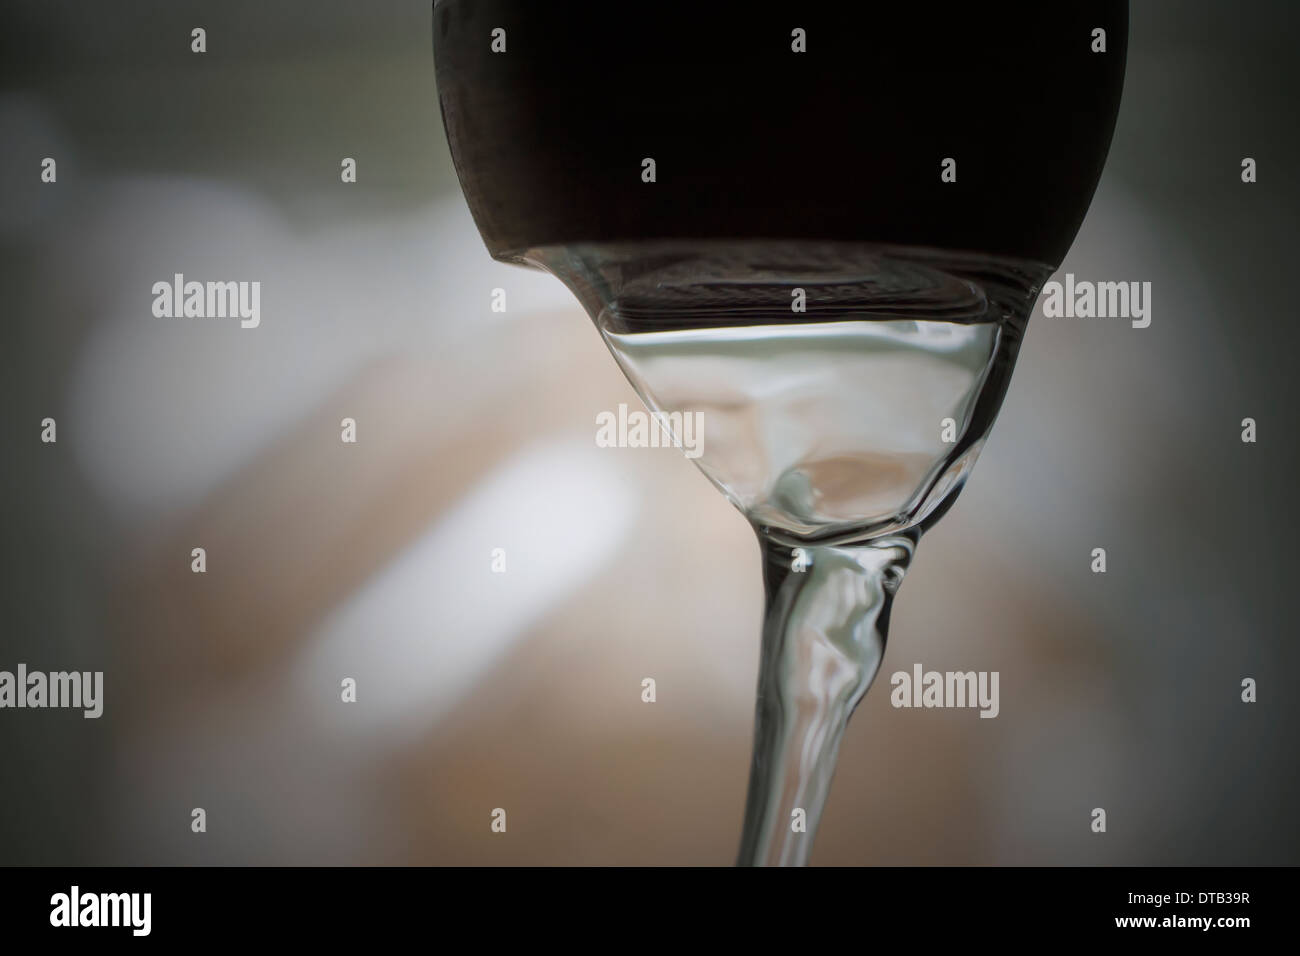 Water running from a faucet. Stock Photo